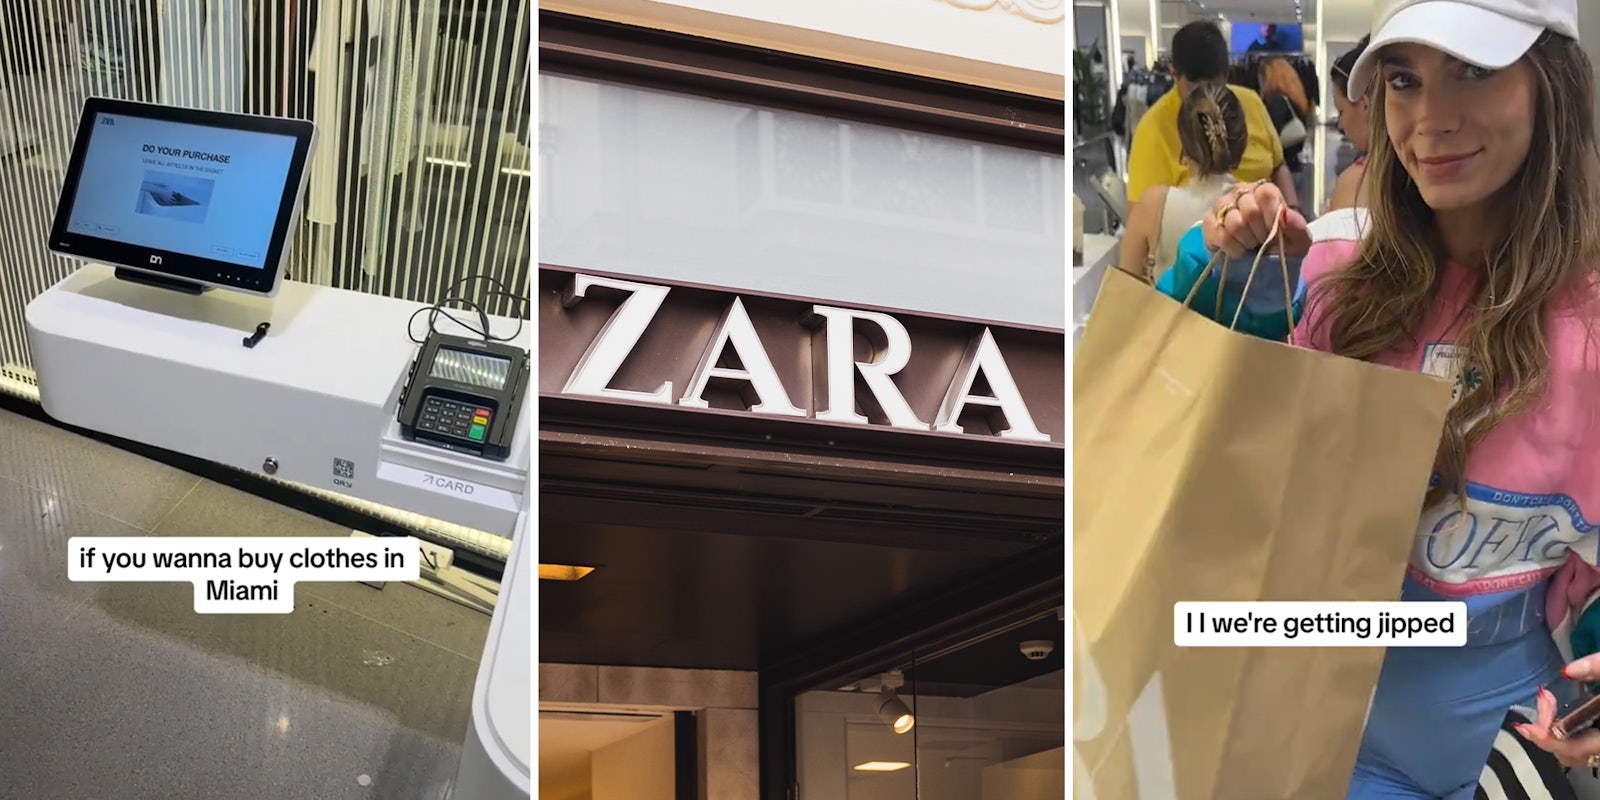 Customer slams Zara’s self-checkout process after he had to take off magnetic strips, hangers himself